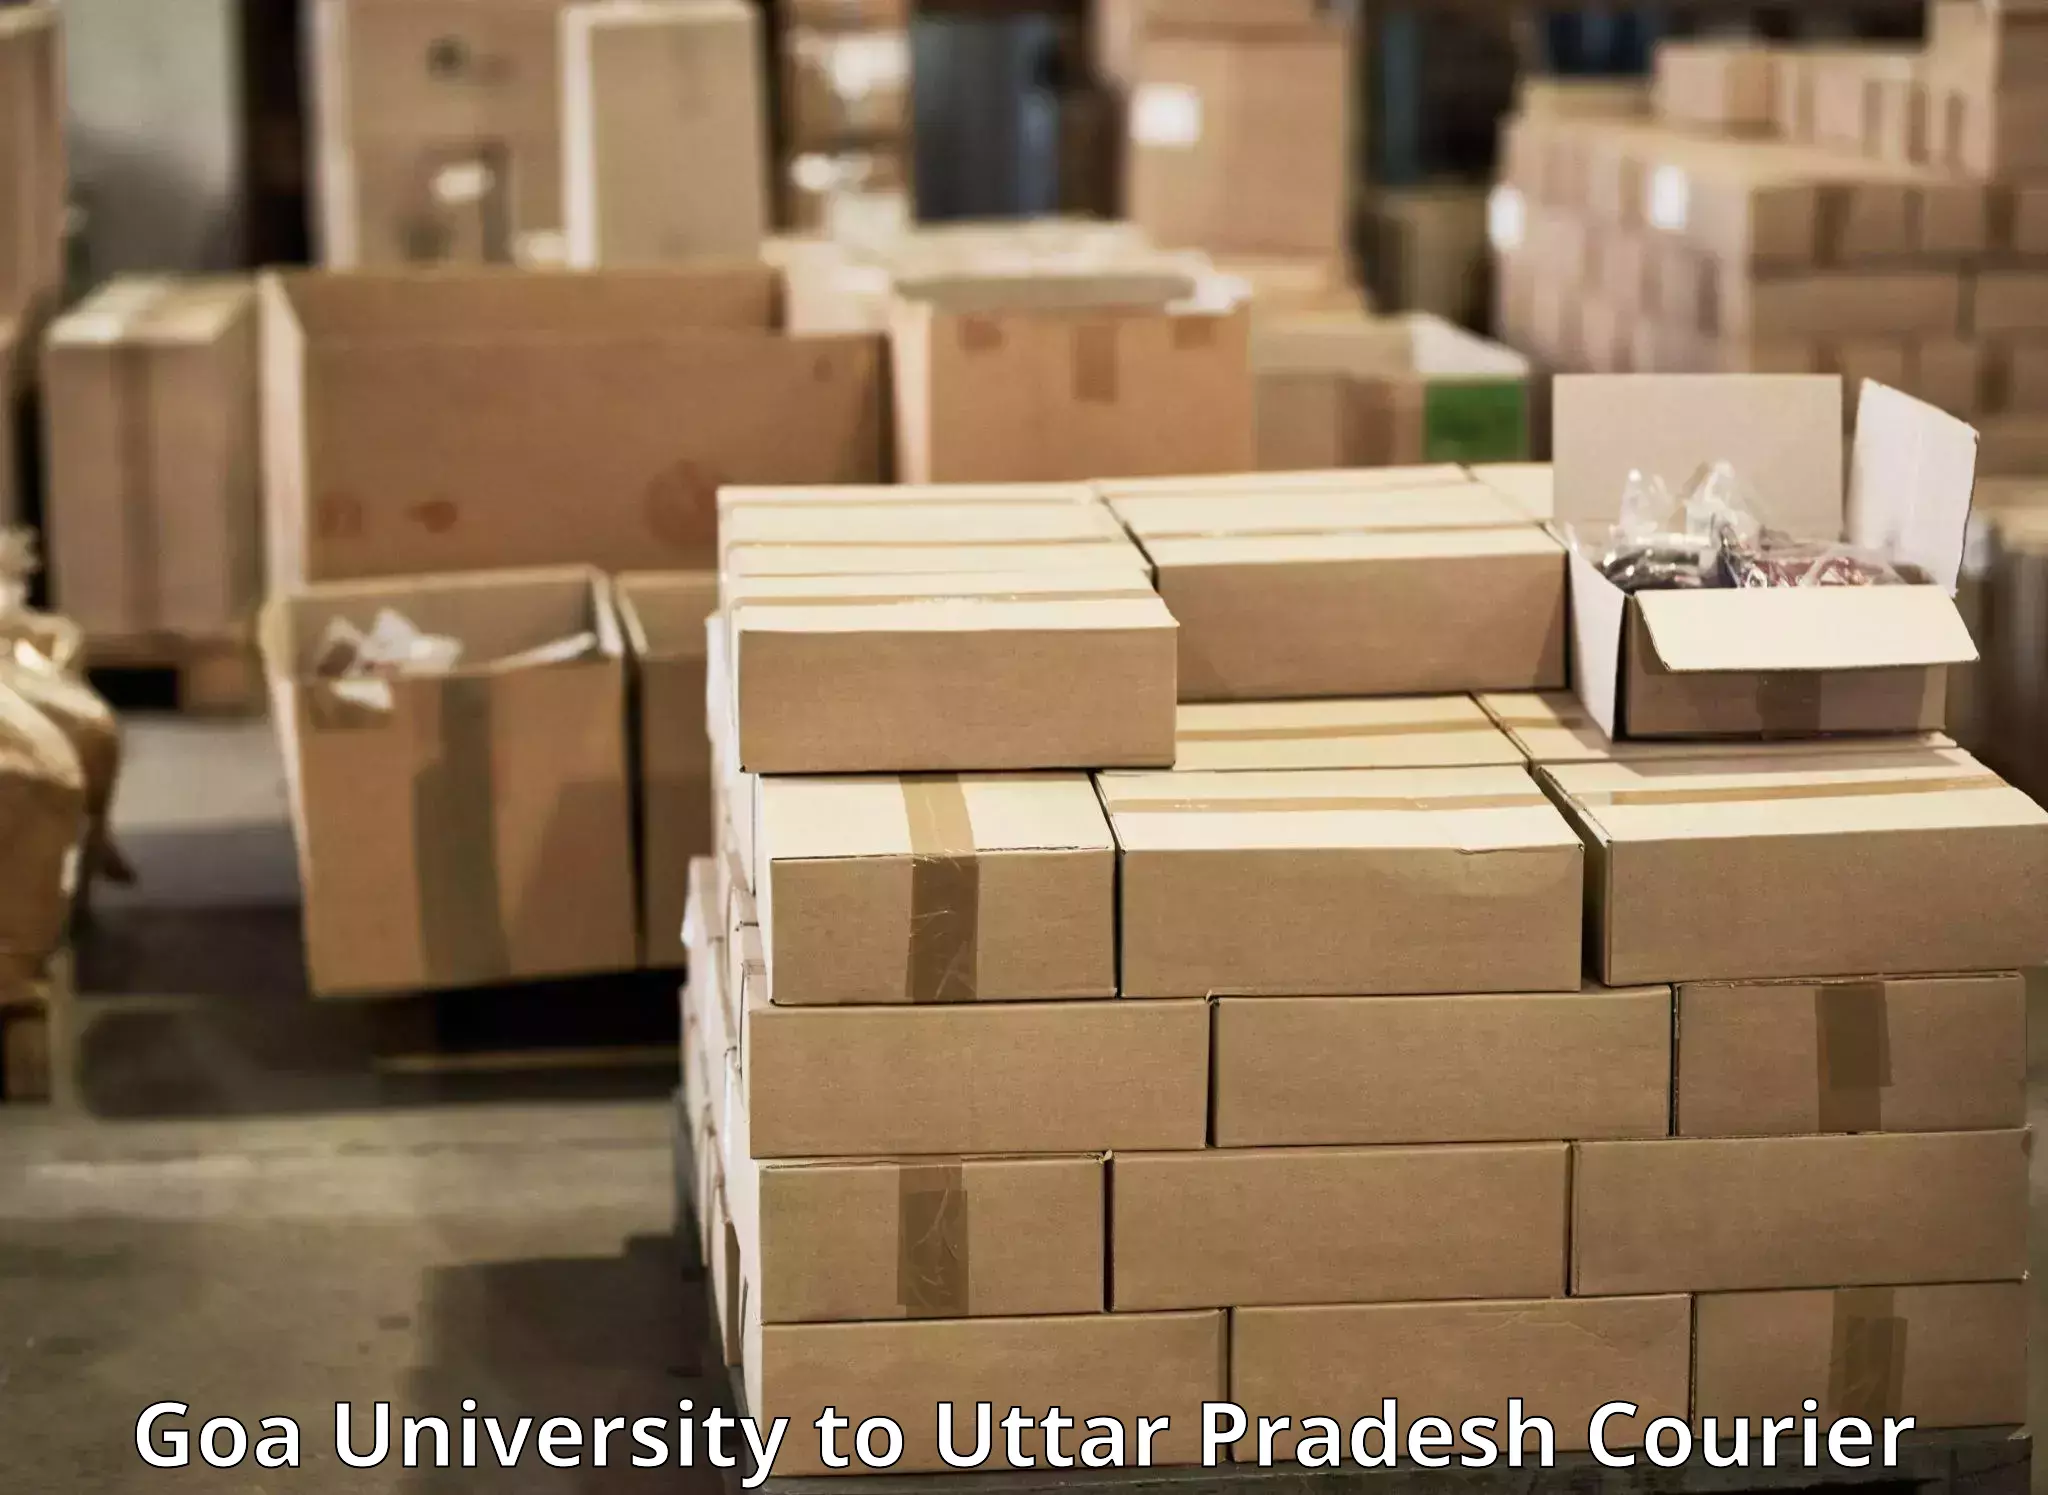 Quality courier services in Goa University to Ambedkar Nagar